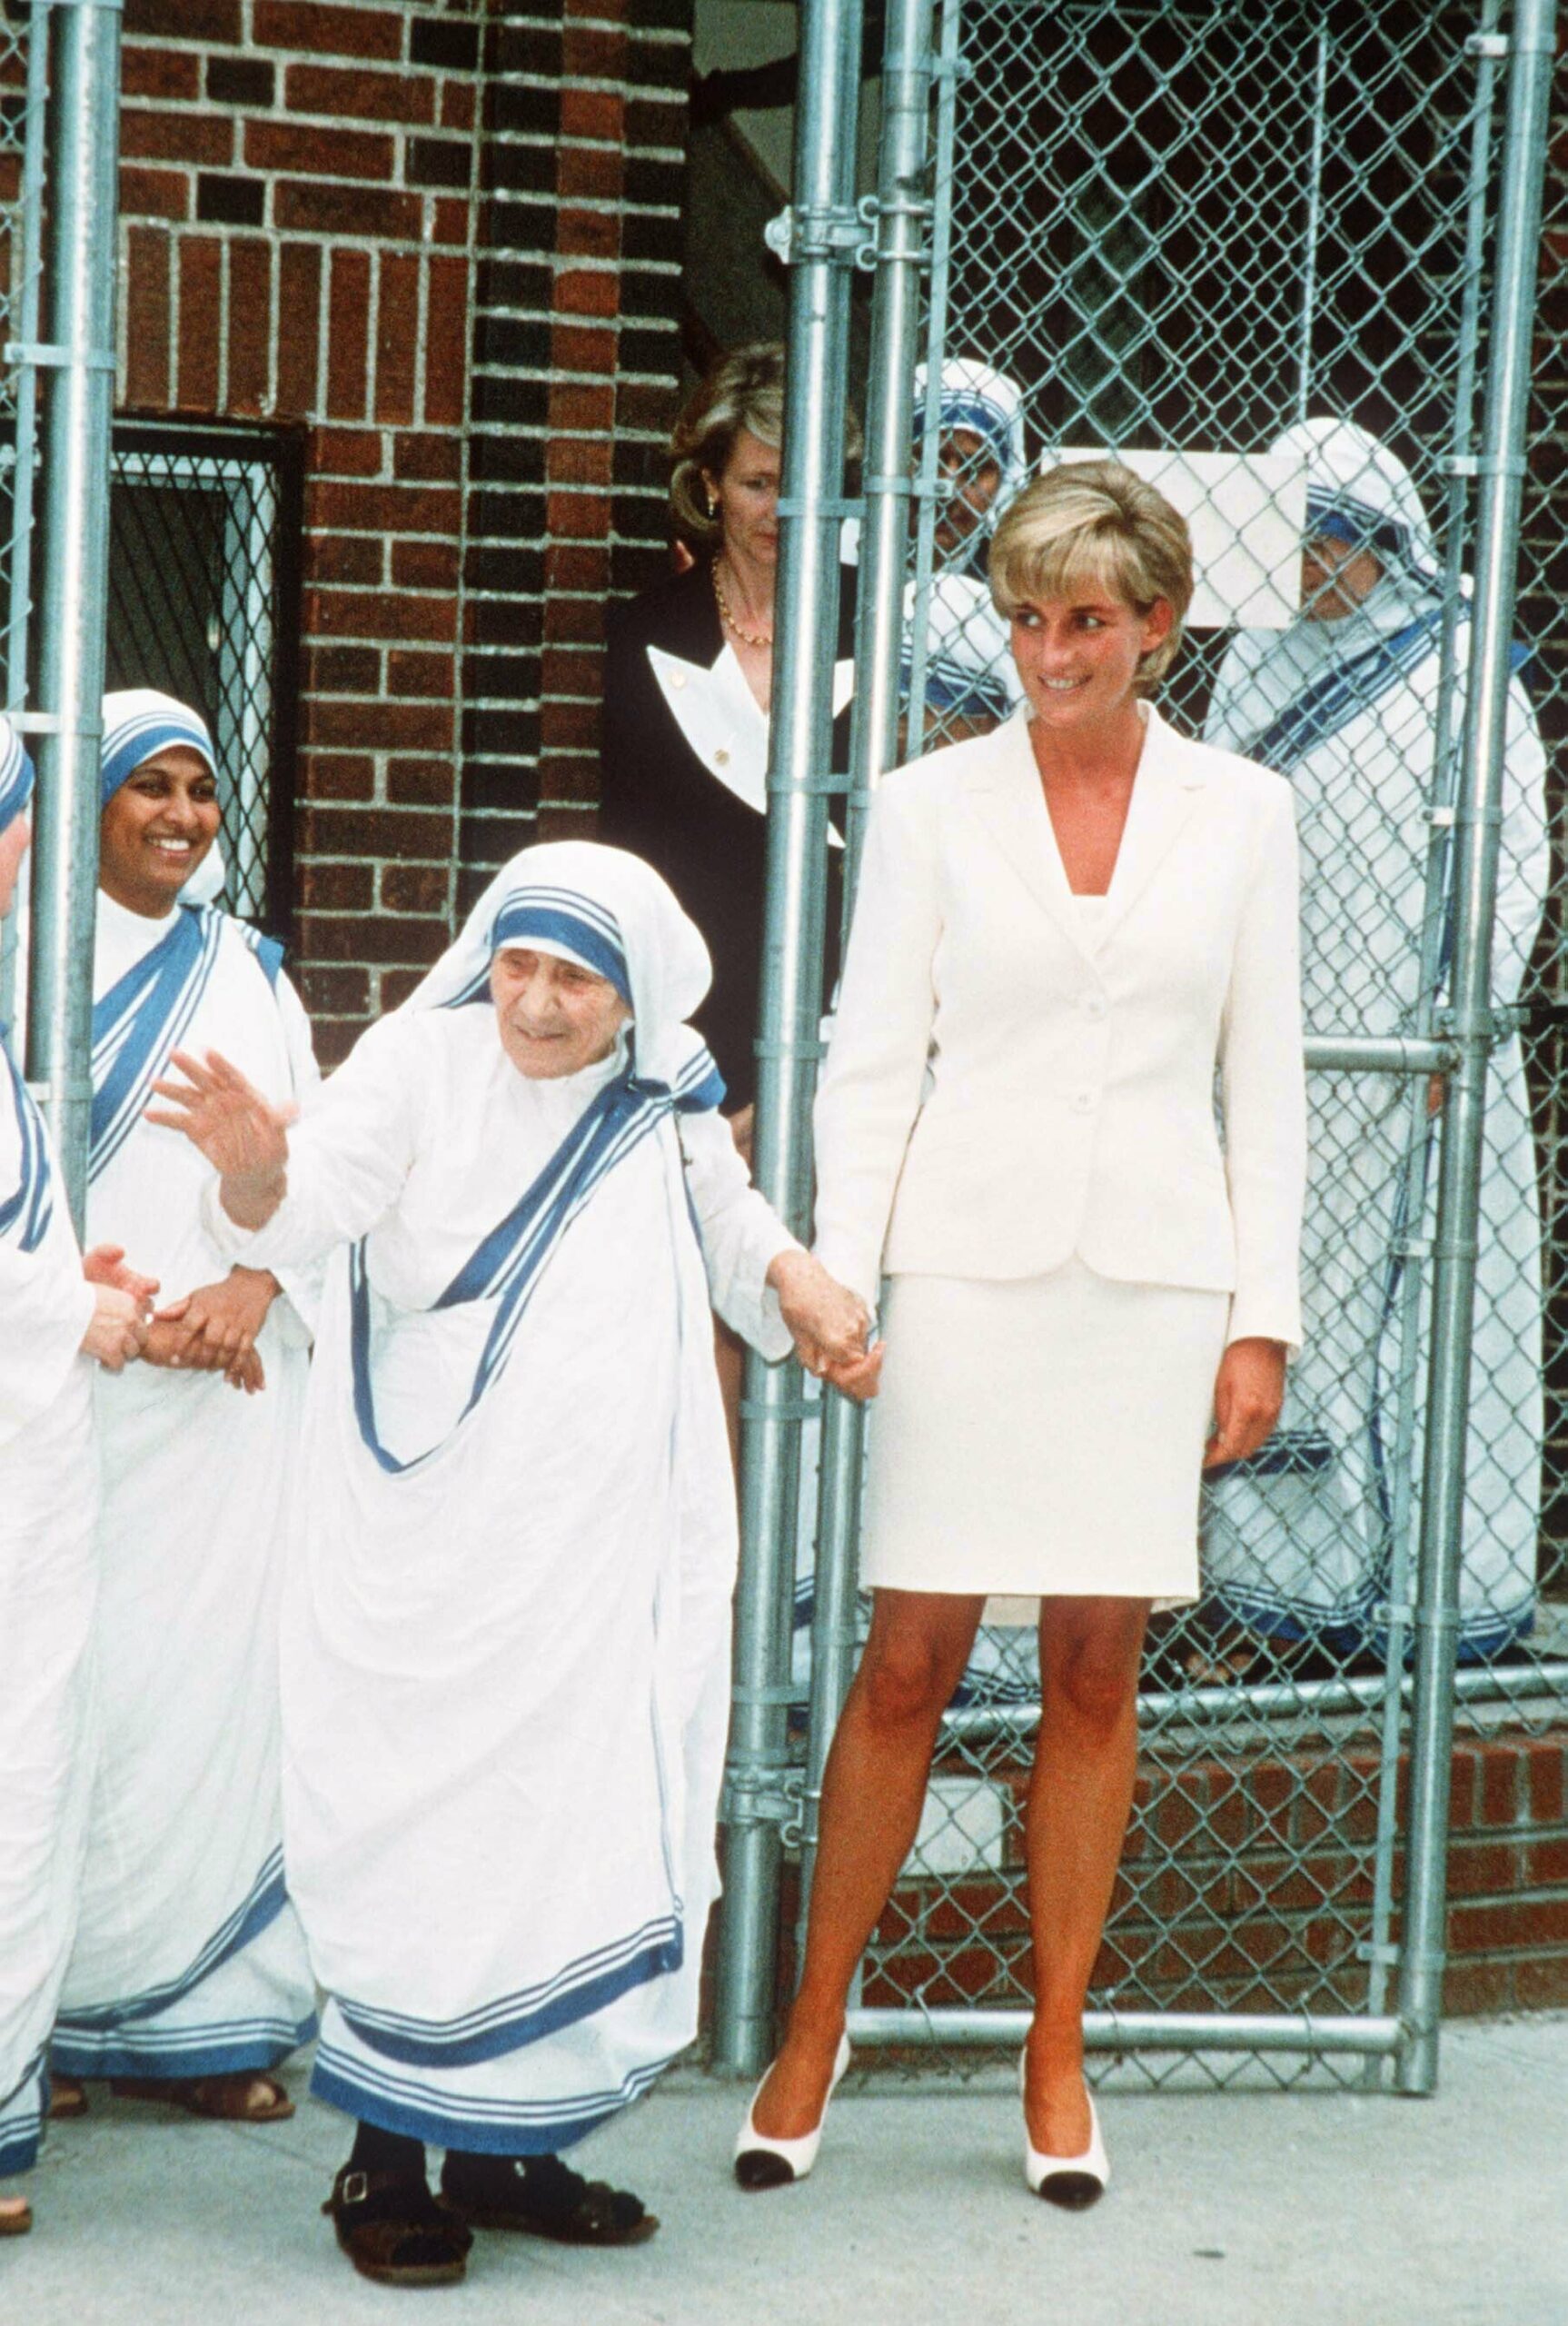 NEW YORK, USA - circa JUNE 18, 1997:  (FILE PHOTO) The Princess of Wales bonds with Mother Teresa in New York. (Photo by Anwar Hussein/WireImage) On July 1st  Diana, Princess Of Wales would have celebrated her 50th BirthdayPlease refer to the following profile on Getty Images Archival for further imagery. http://www.gettyimages.co.uk/Search/Search.aspx?EventId=107811125&EditorialProduct=ArchivalFor further images see also:Princess Diana:http://www.gettyimages.co.uk/Account/MediaBin/LightboxDetail.aspx?Id=17267941&MediaBinUserId=5317233Following Diana